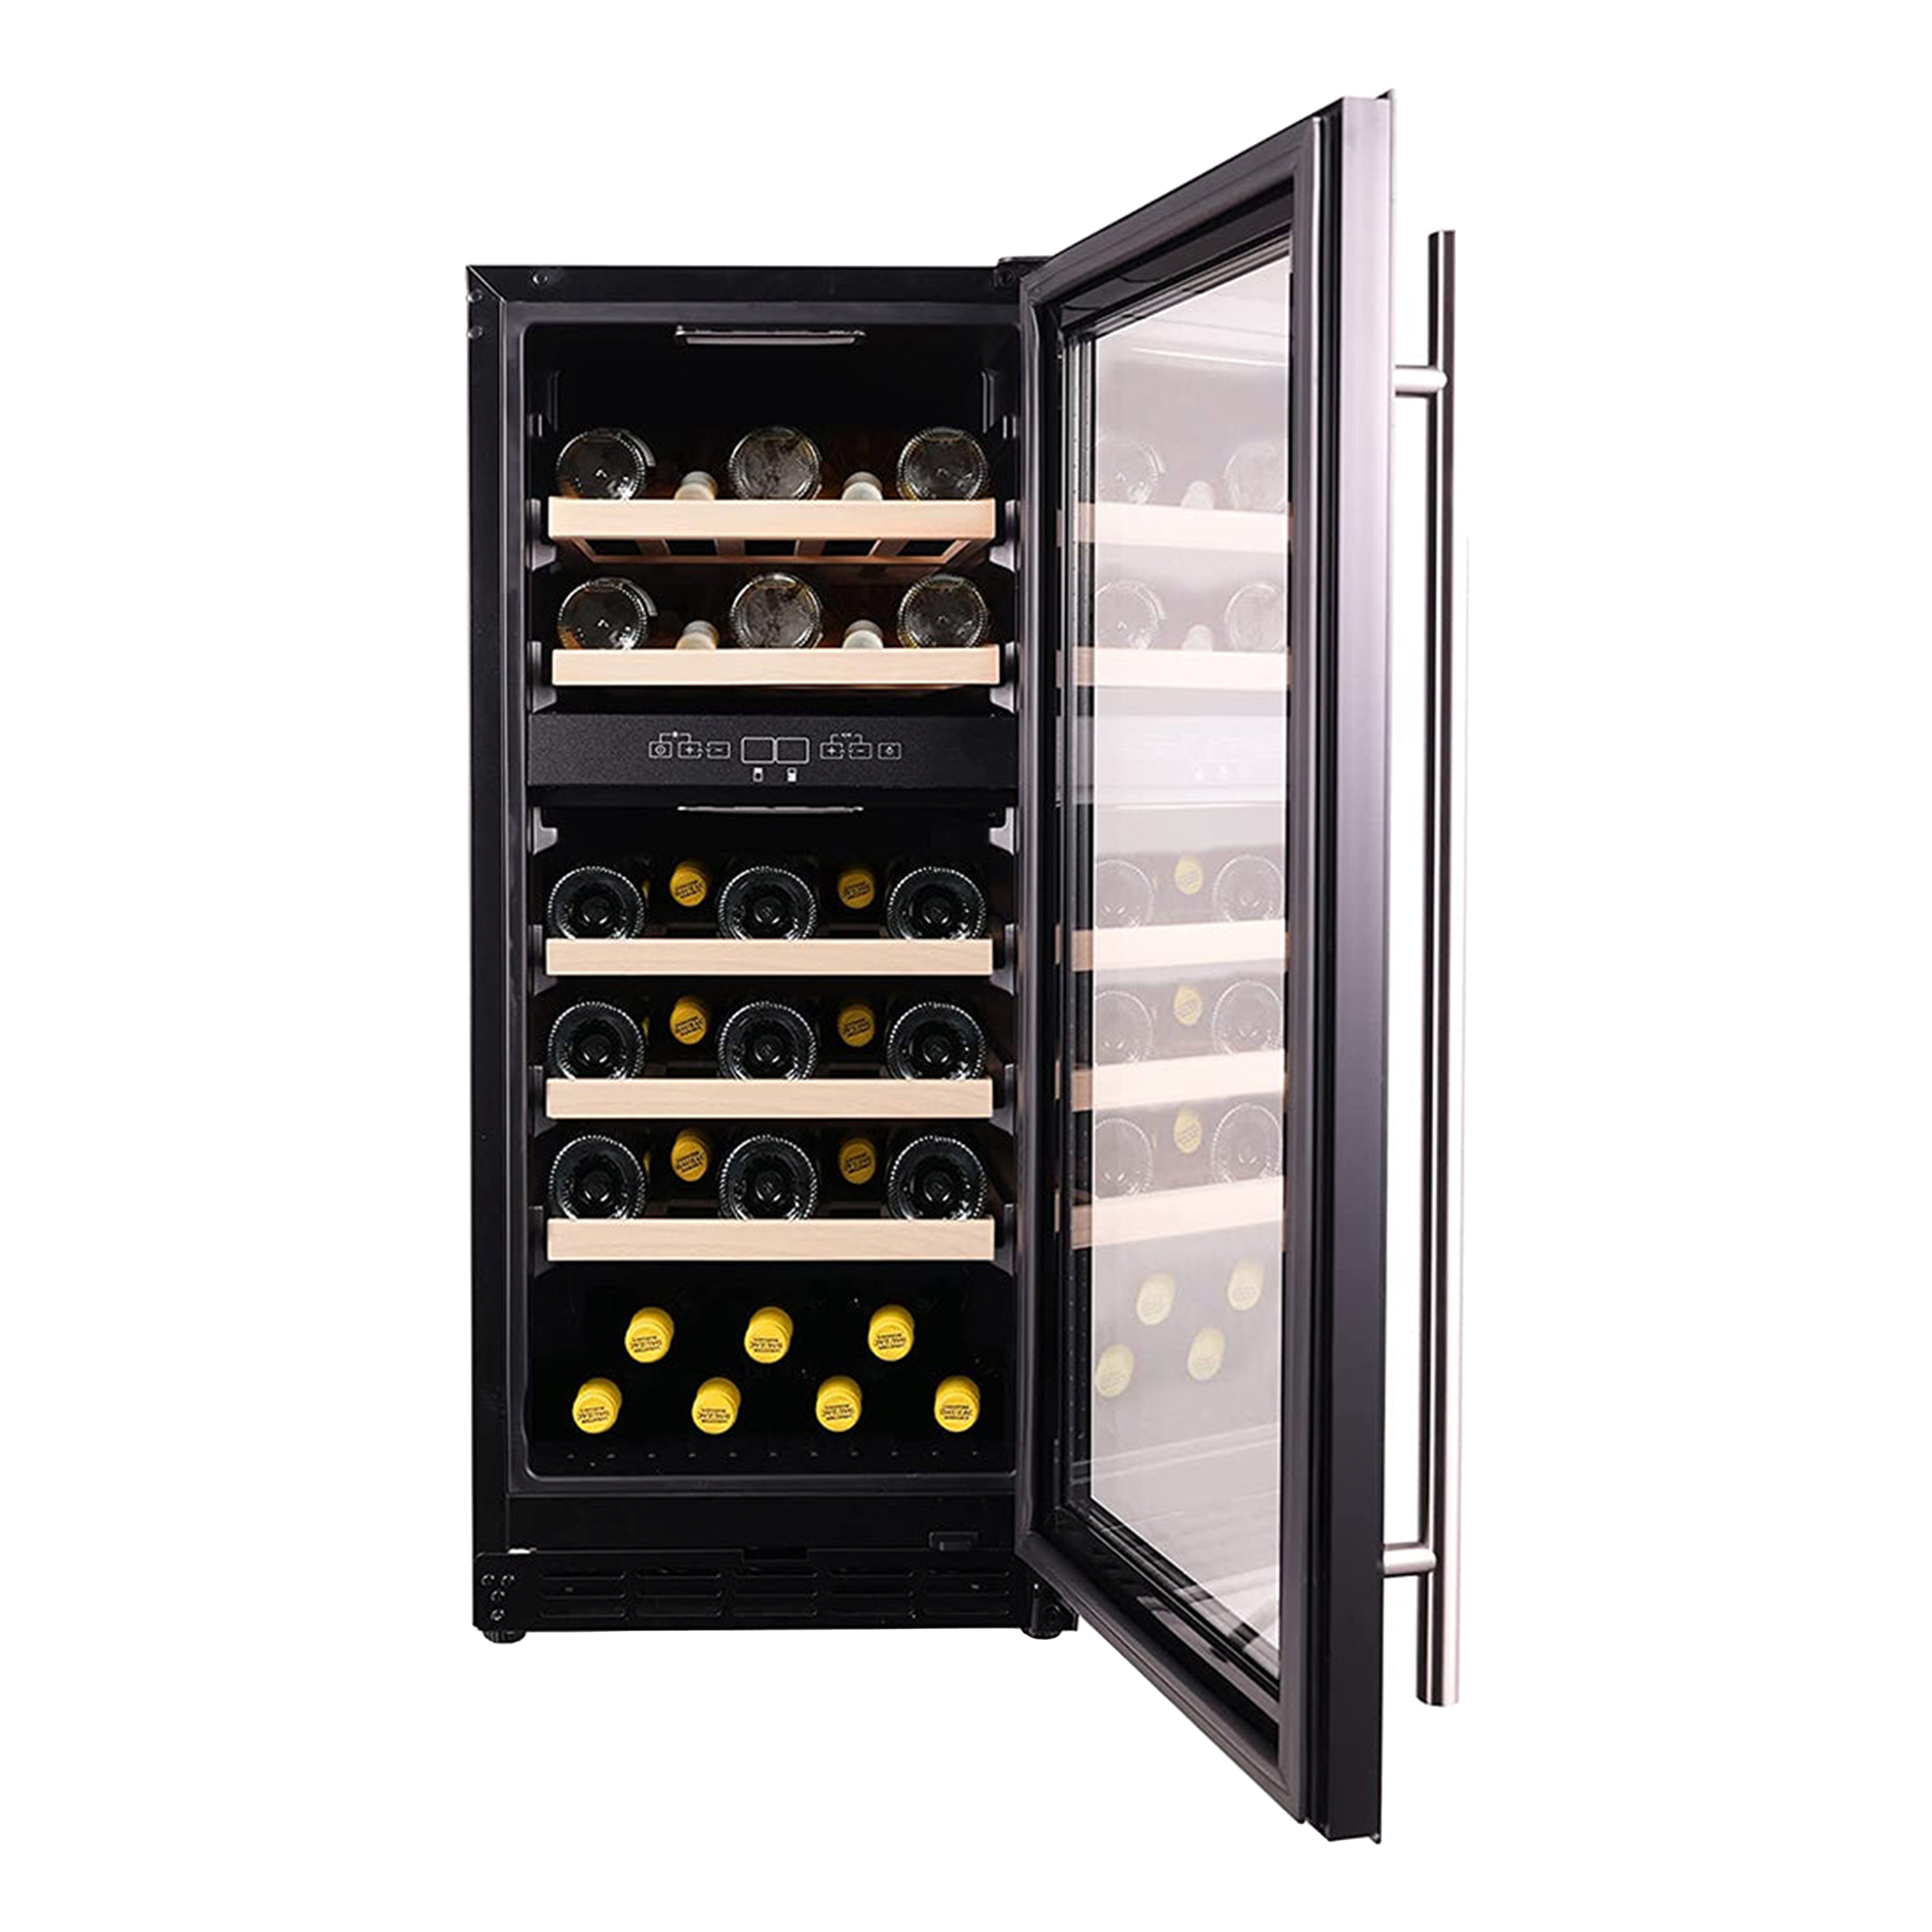 Front view of a 2.9 Cu Ft Freestanding Dual Zone Wine Cooler 29 bottles with the door open, showcasing fully-stocked wine bottles on 5 wooden shelves and a digital temperature control panel